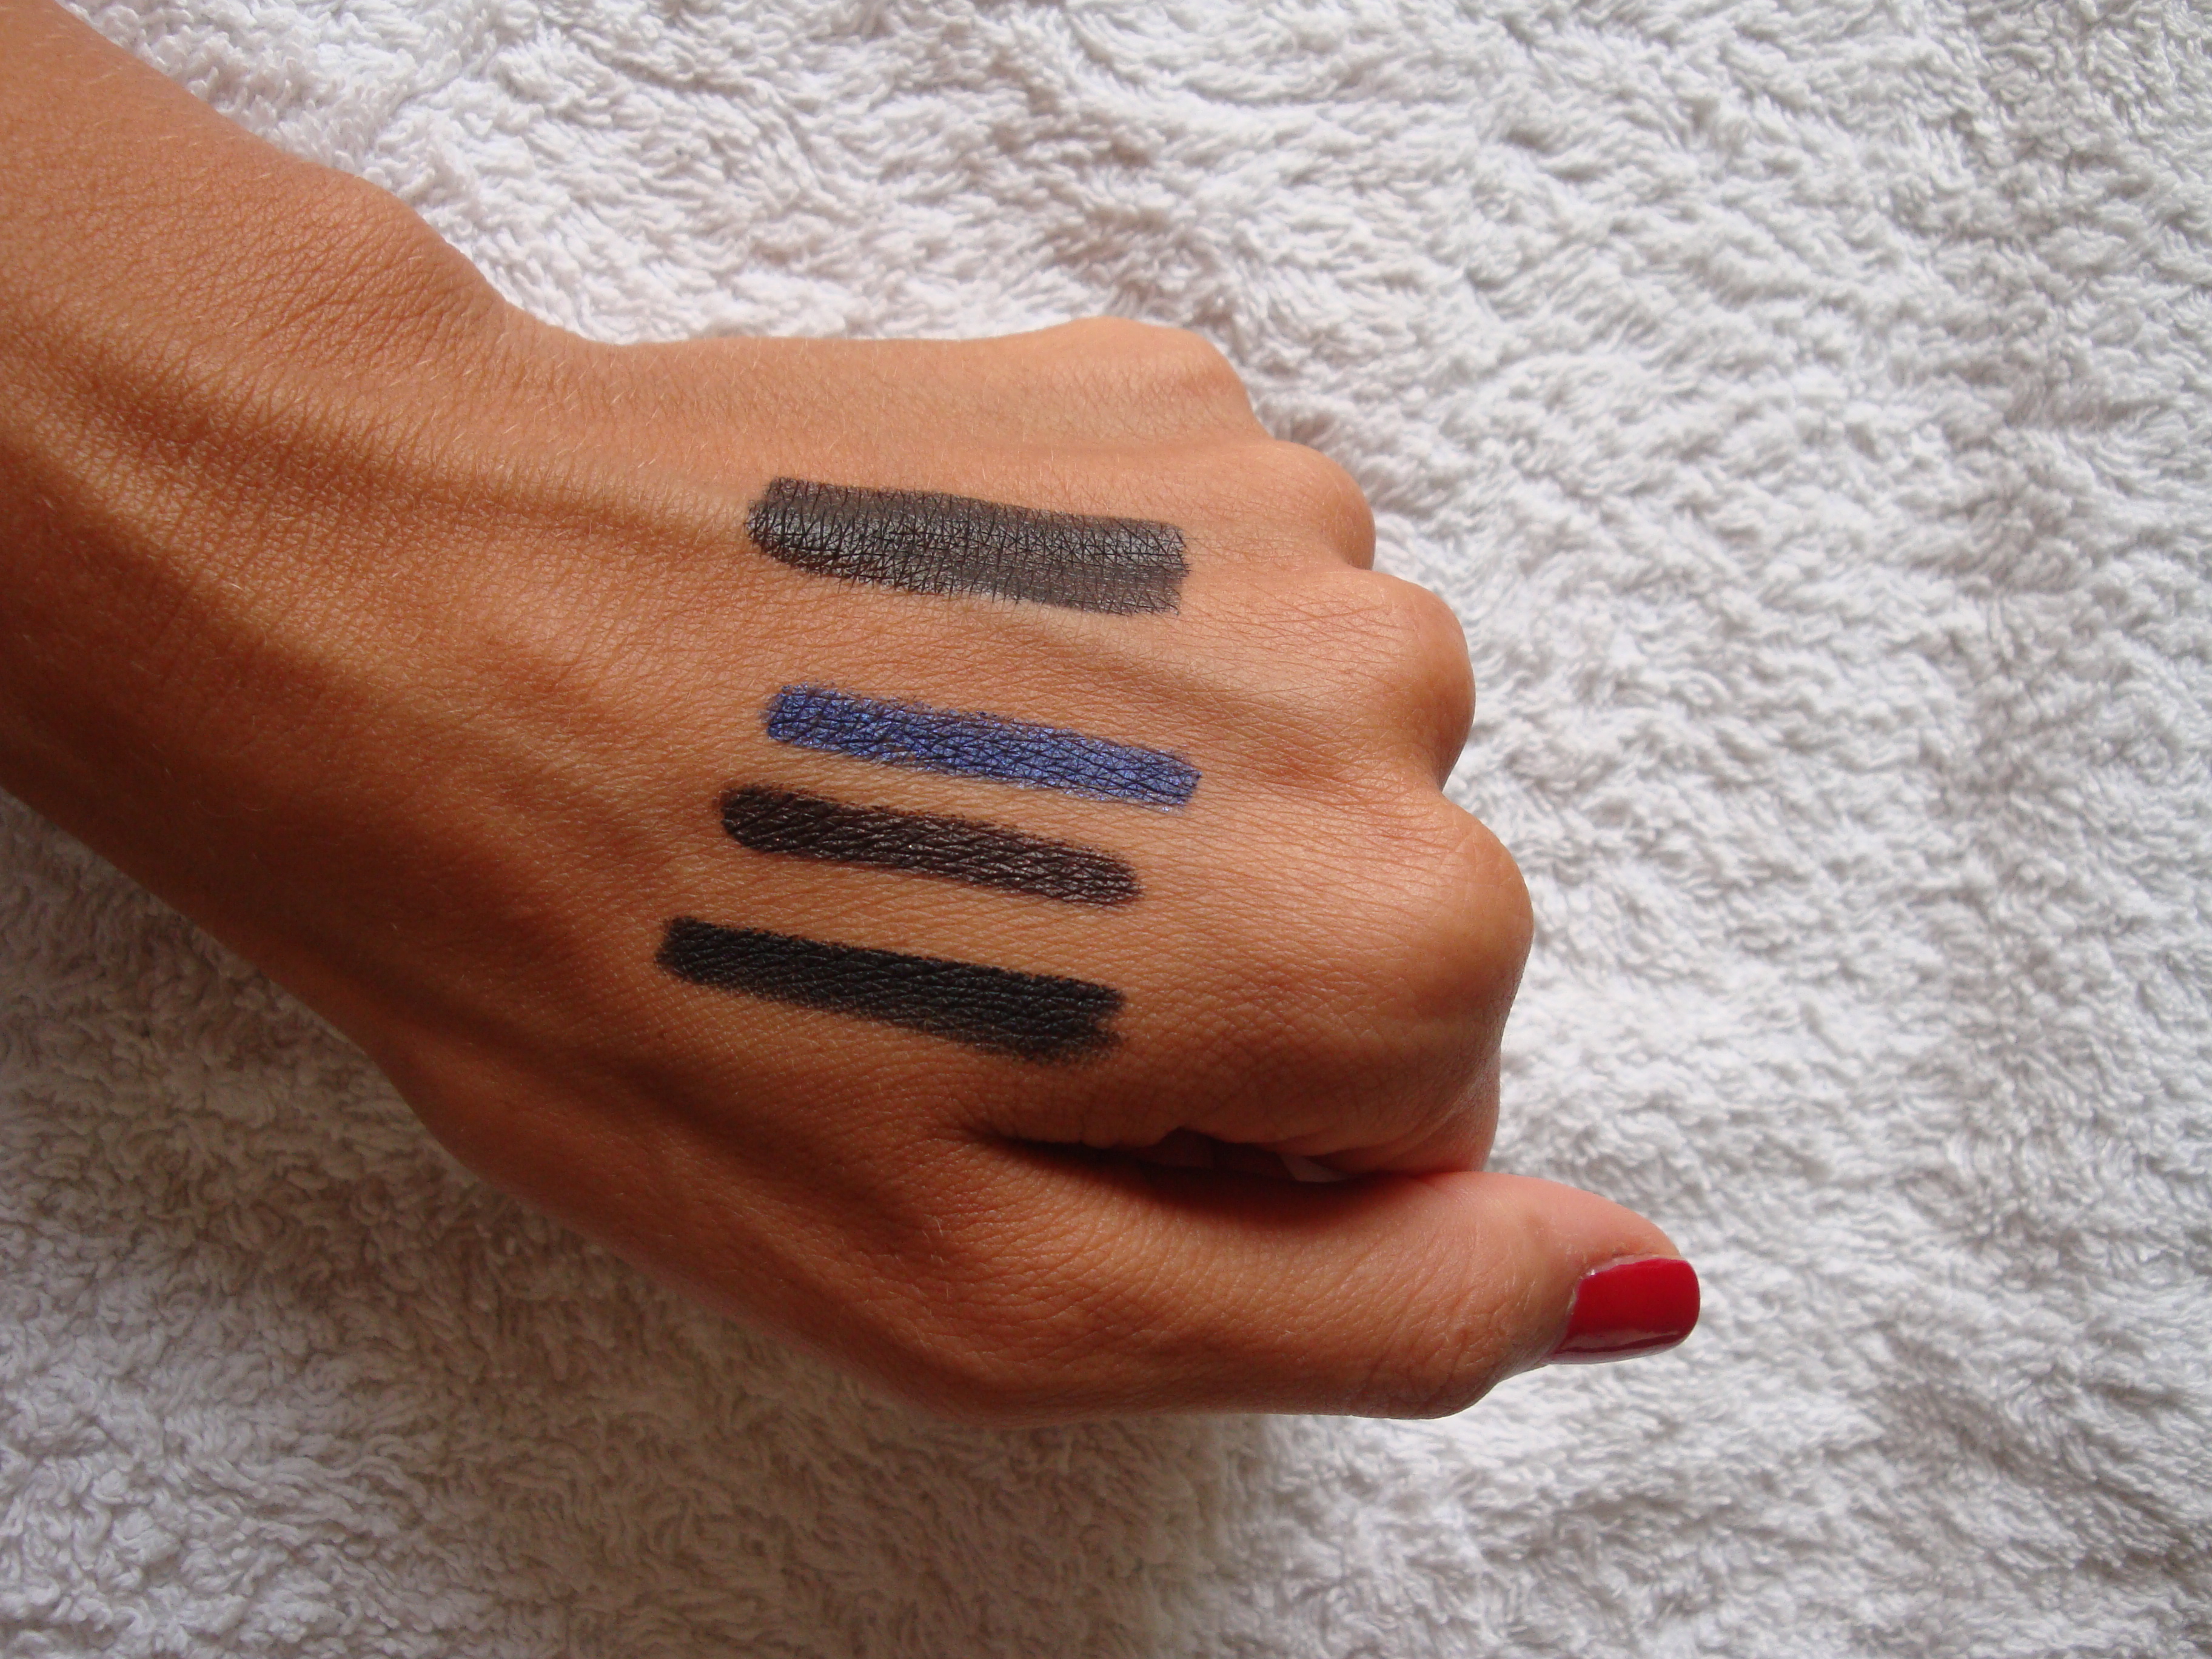 L'Oreal superliner silkissime + blackbuster swatches